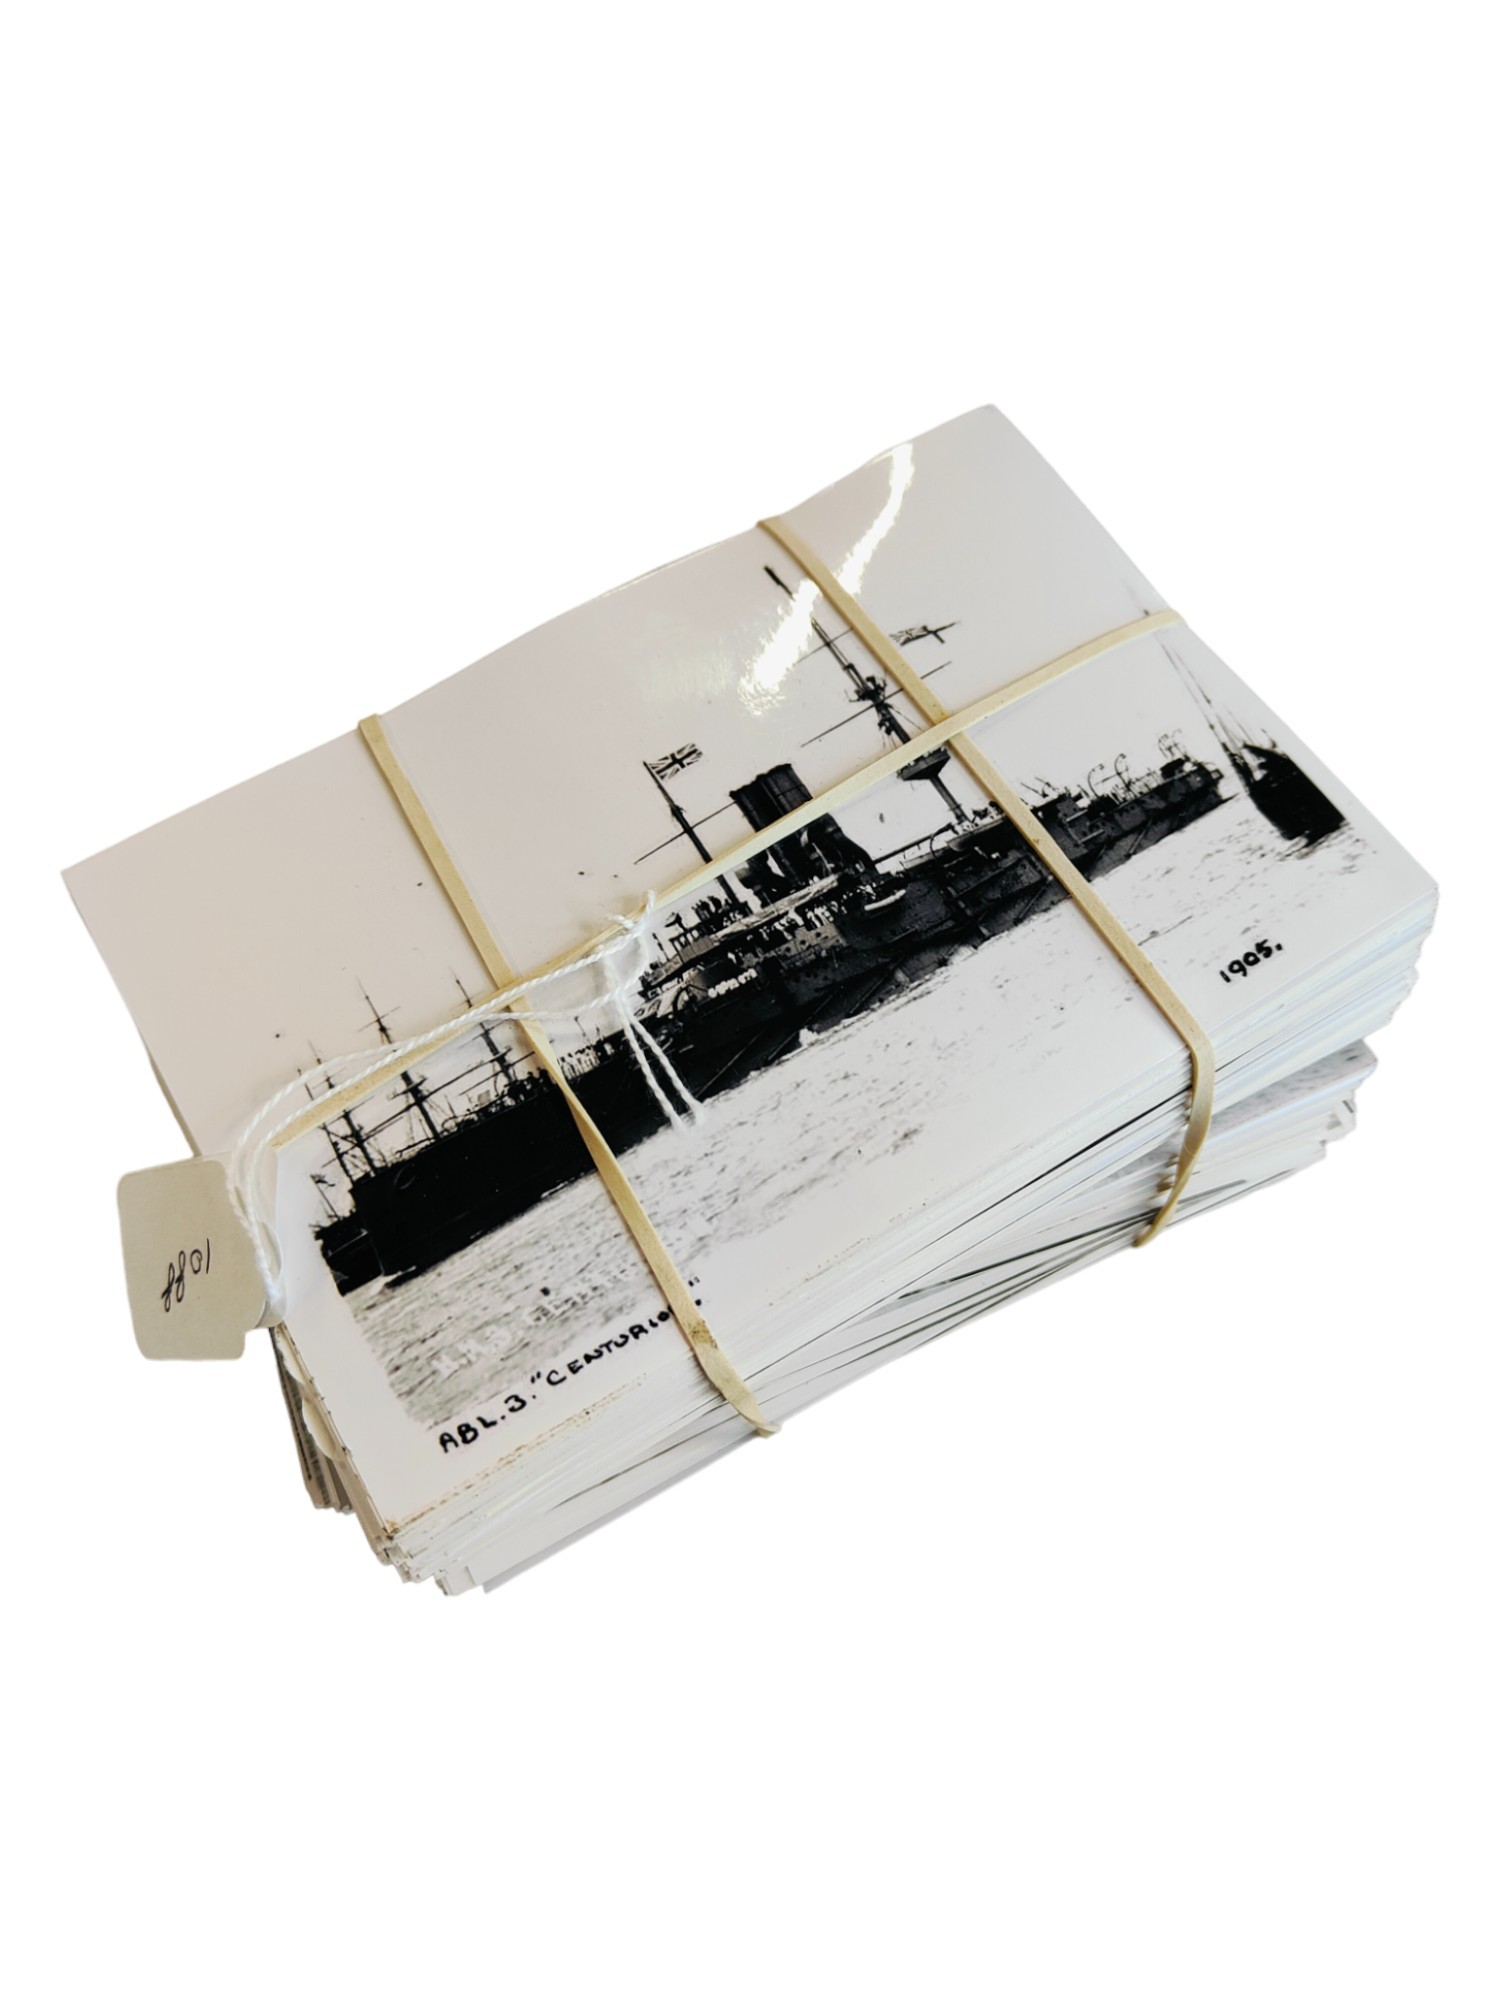 LARGE QUANTITY OF PHOTOGRAPHS OF SHIPS